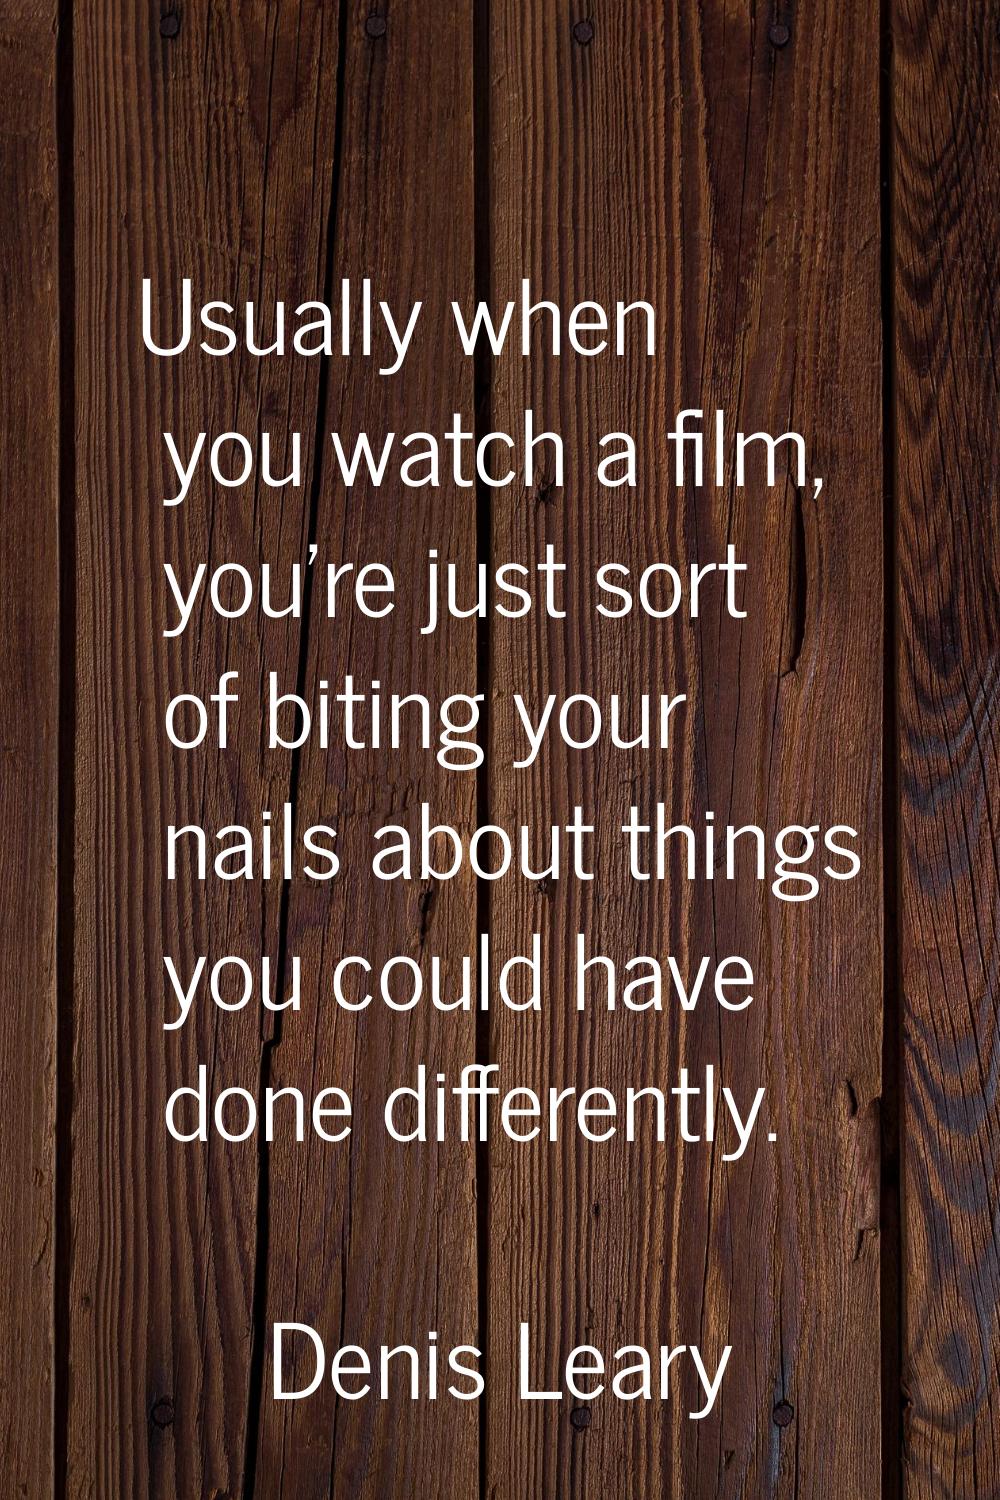 Usually when you watch a film, you're just sort of biting your nails about things you could have do